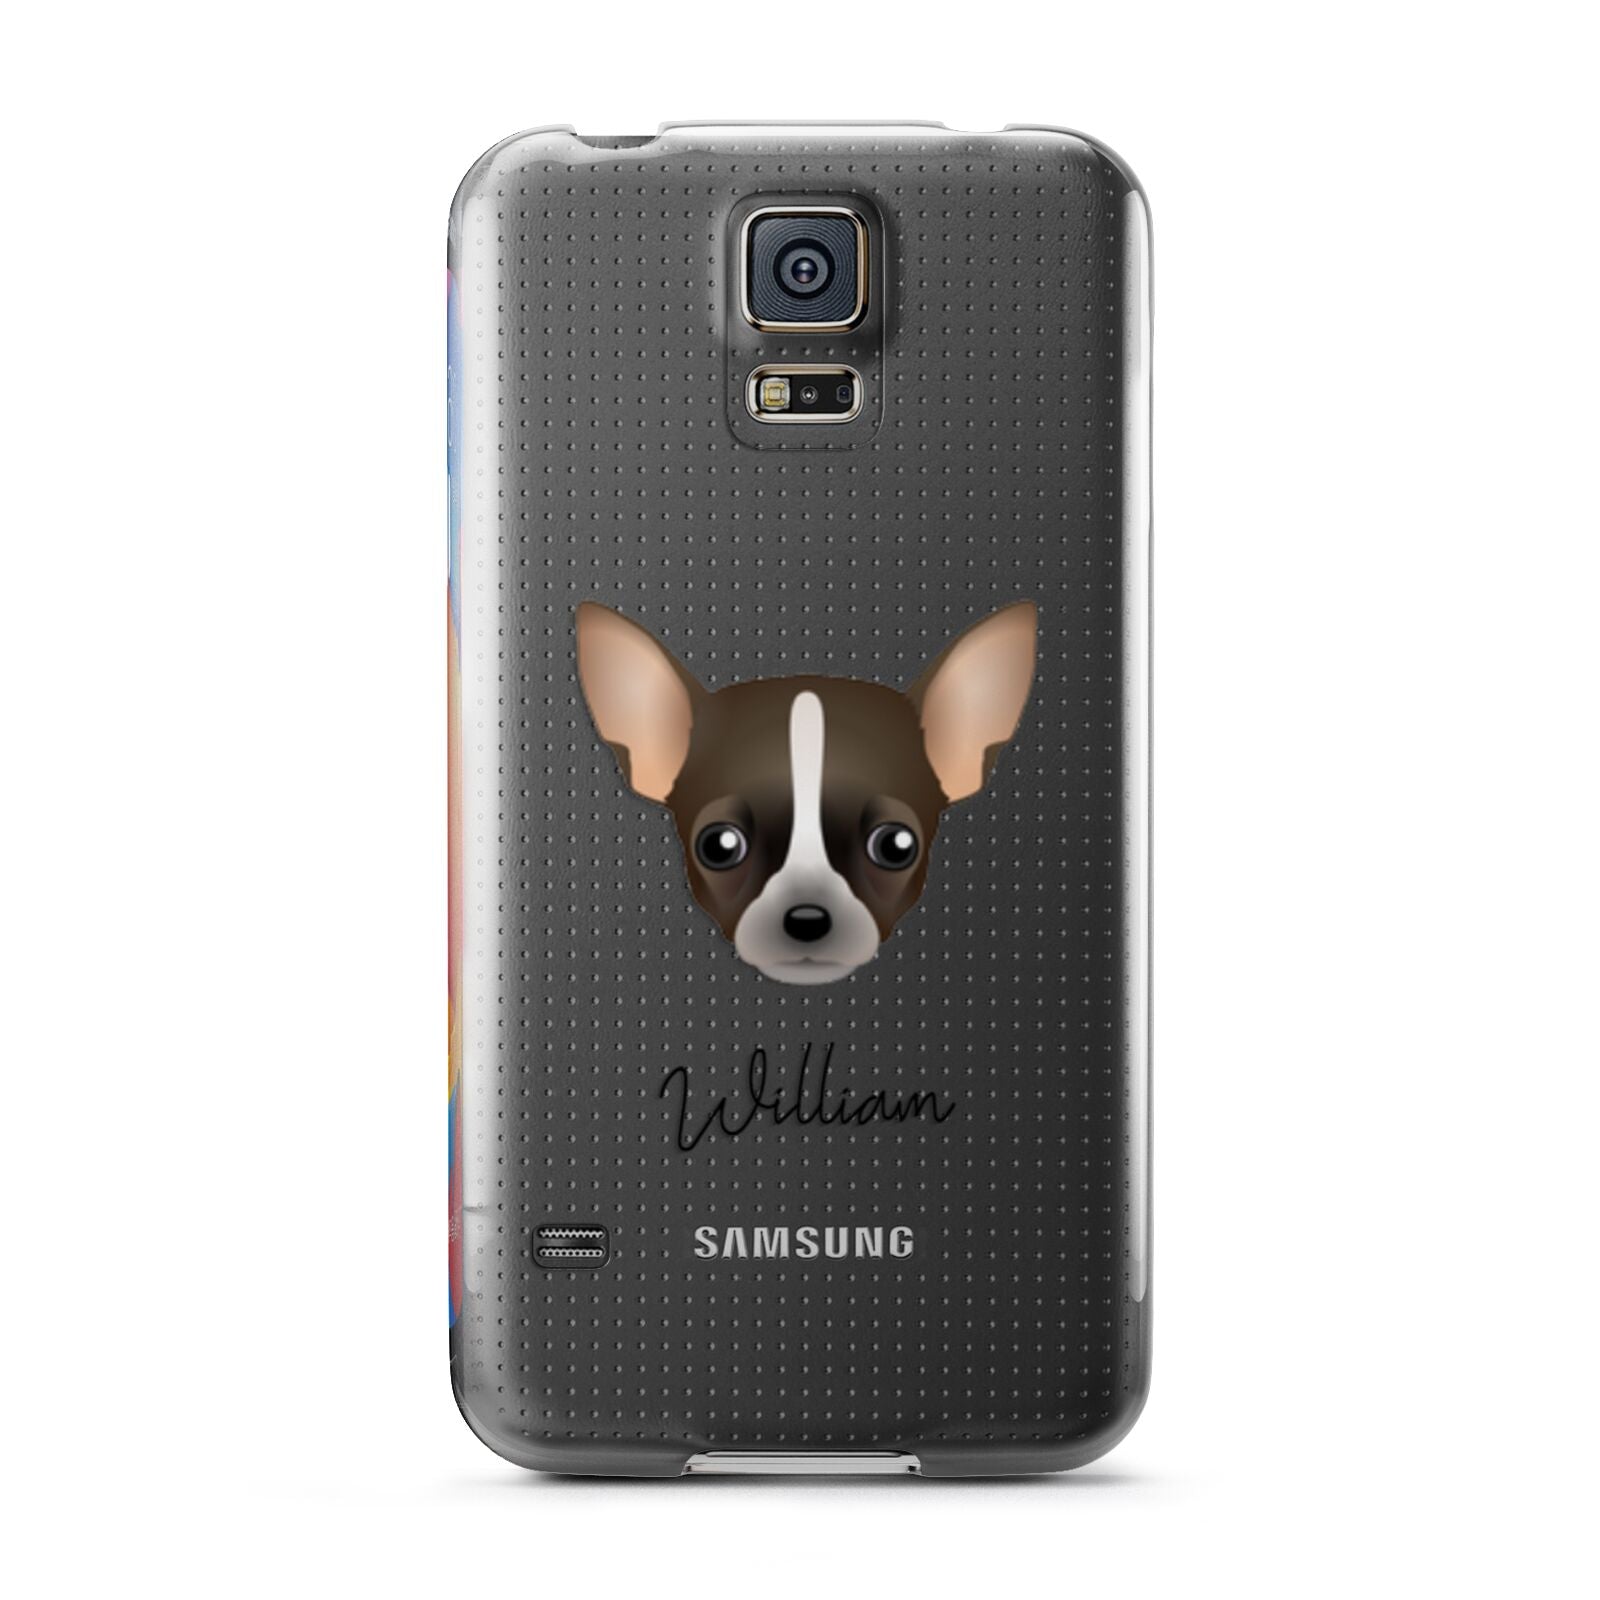 Chihuahua Personalised Samsung Galaxy S5 Case